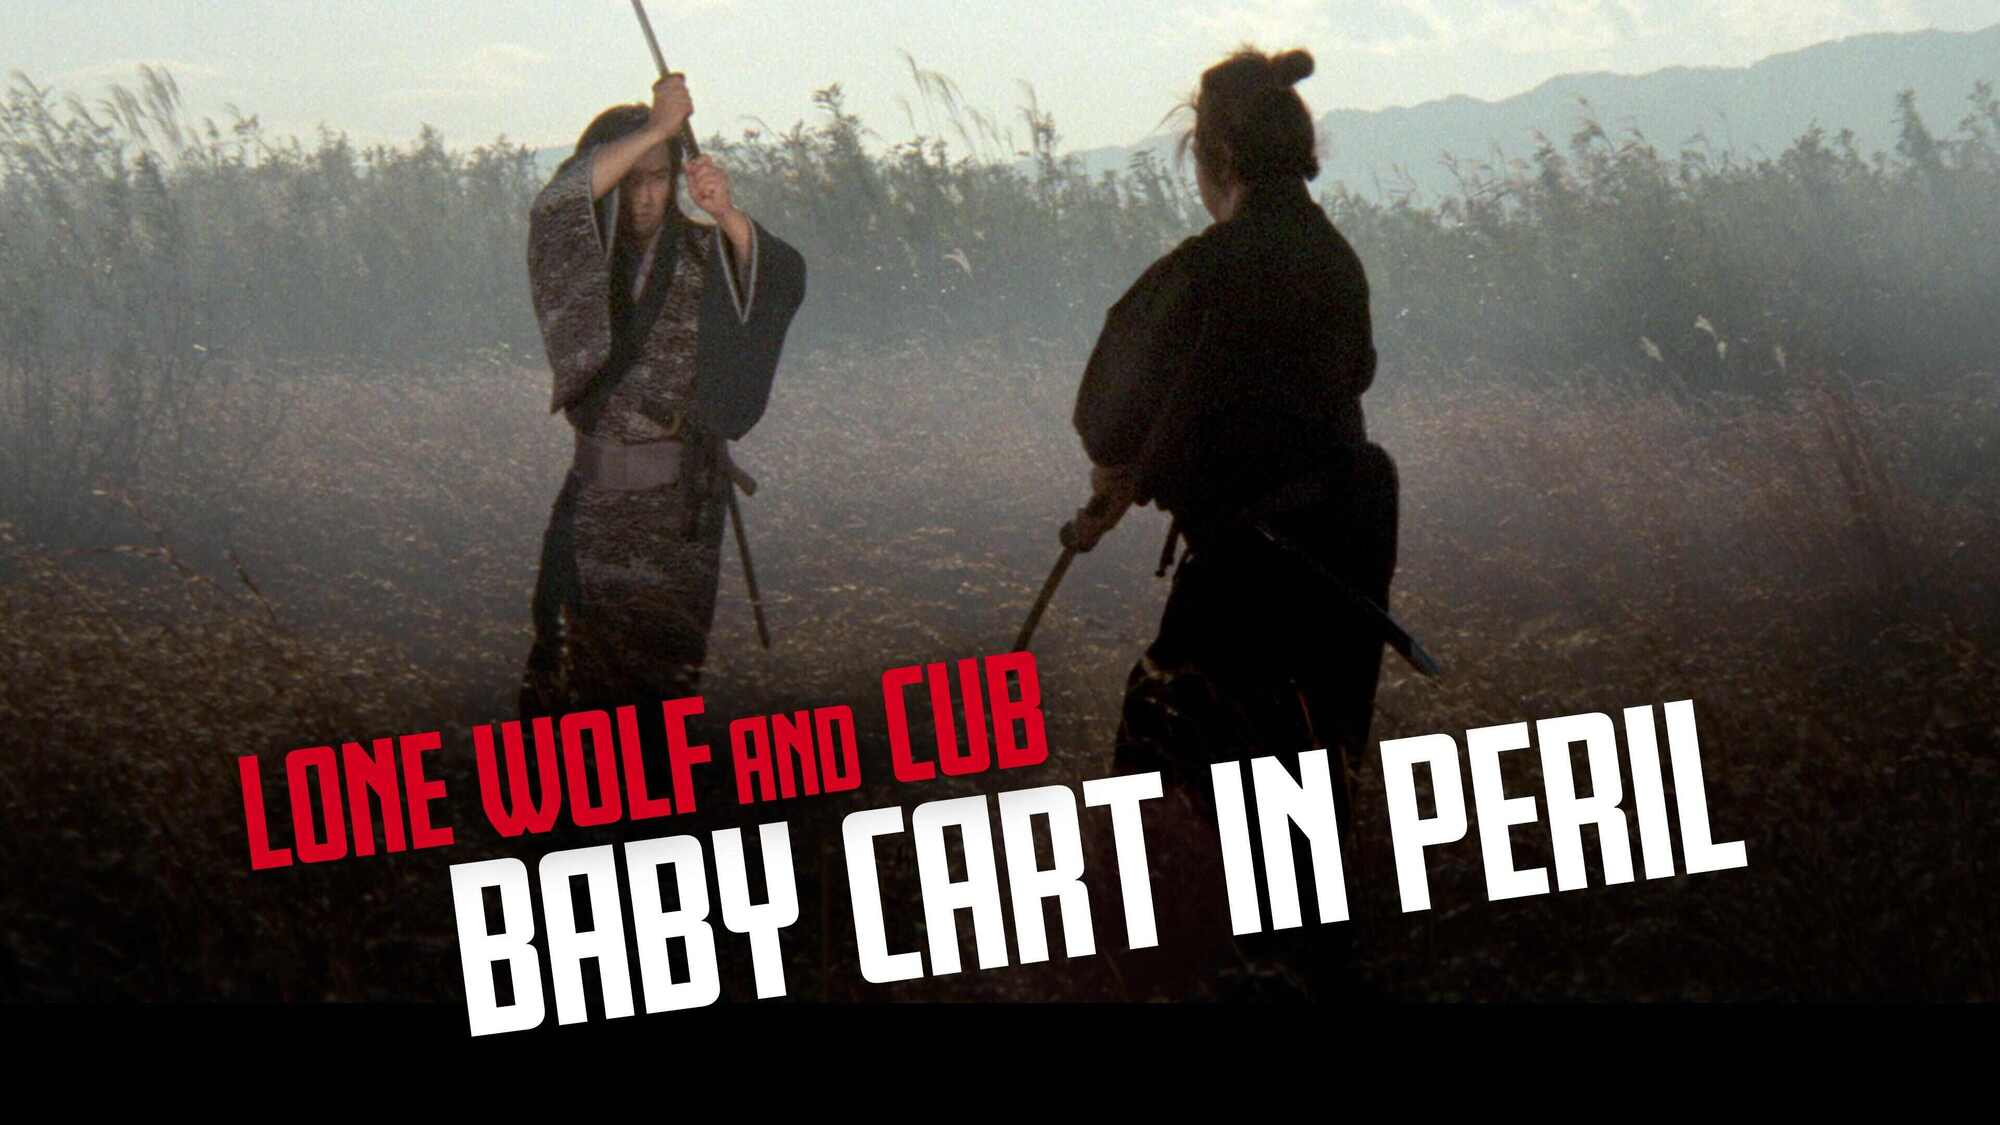 34-facts-about-the-movie-lone-wolf-and-cub-baby-cart-in-peril